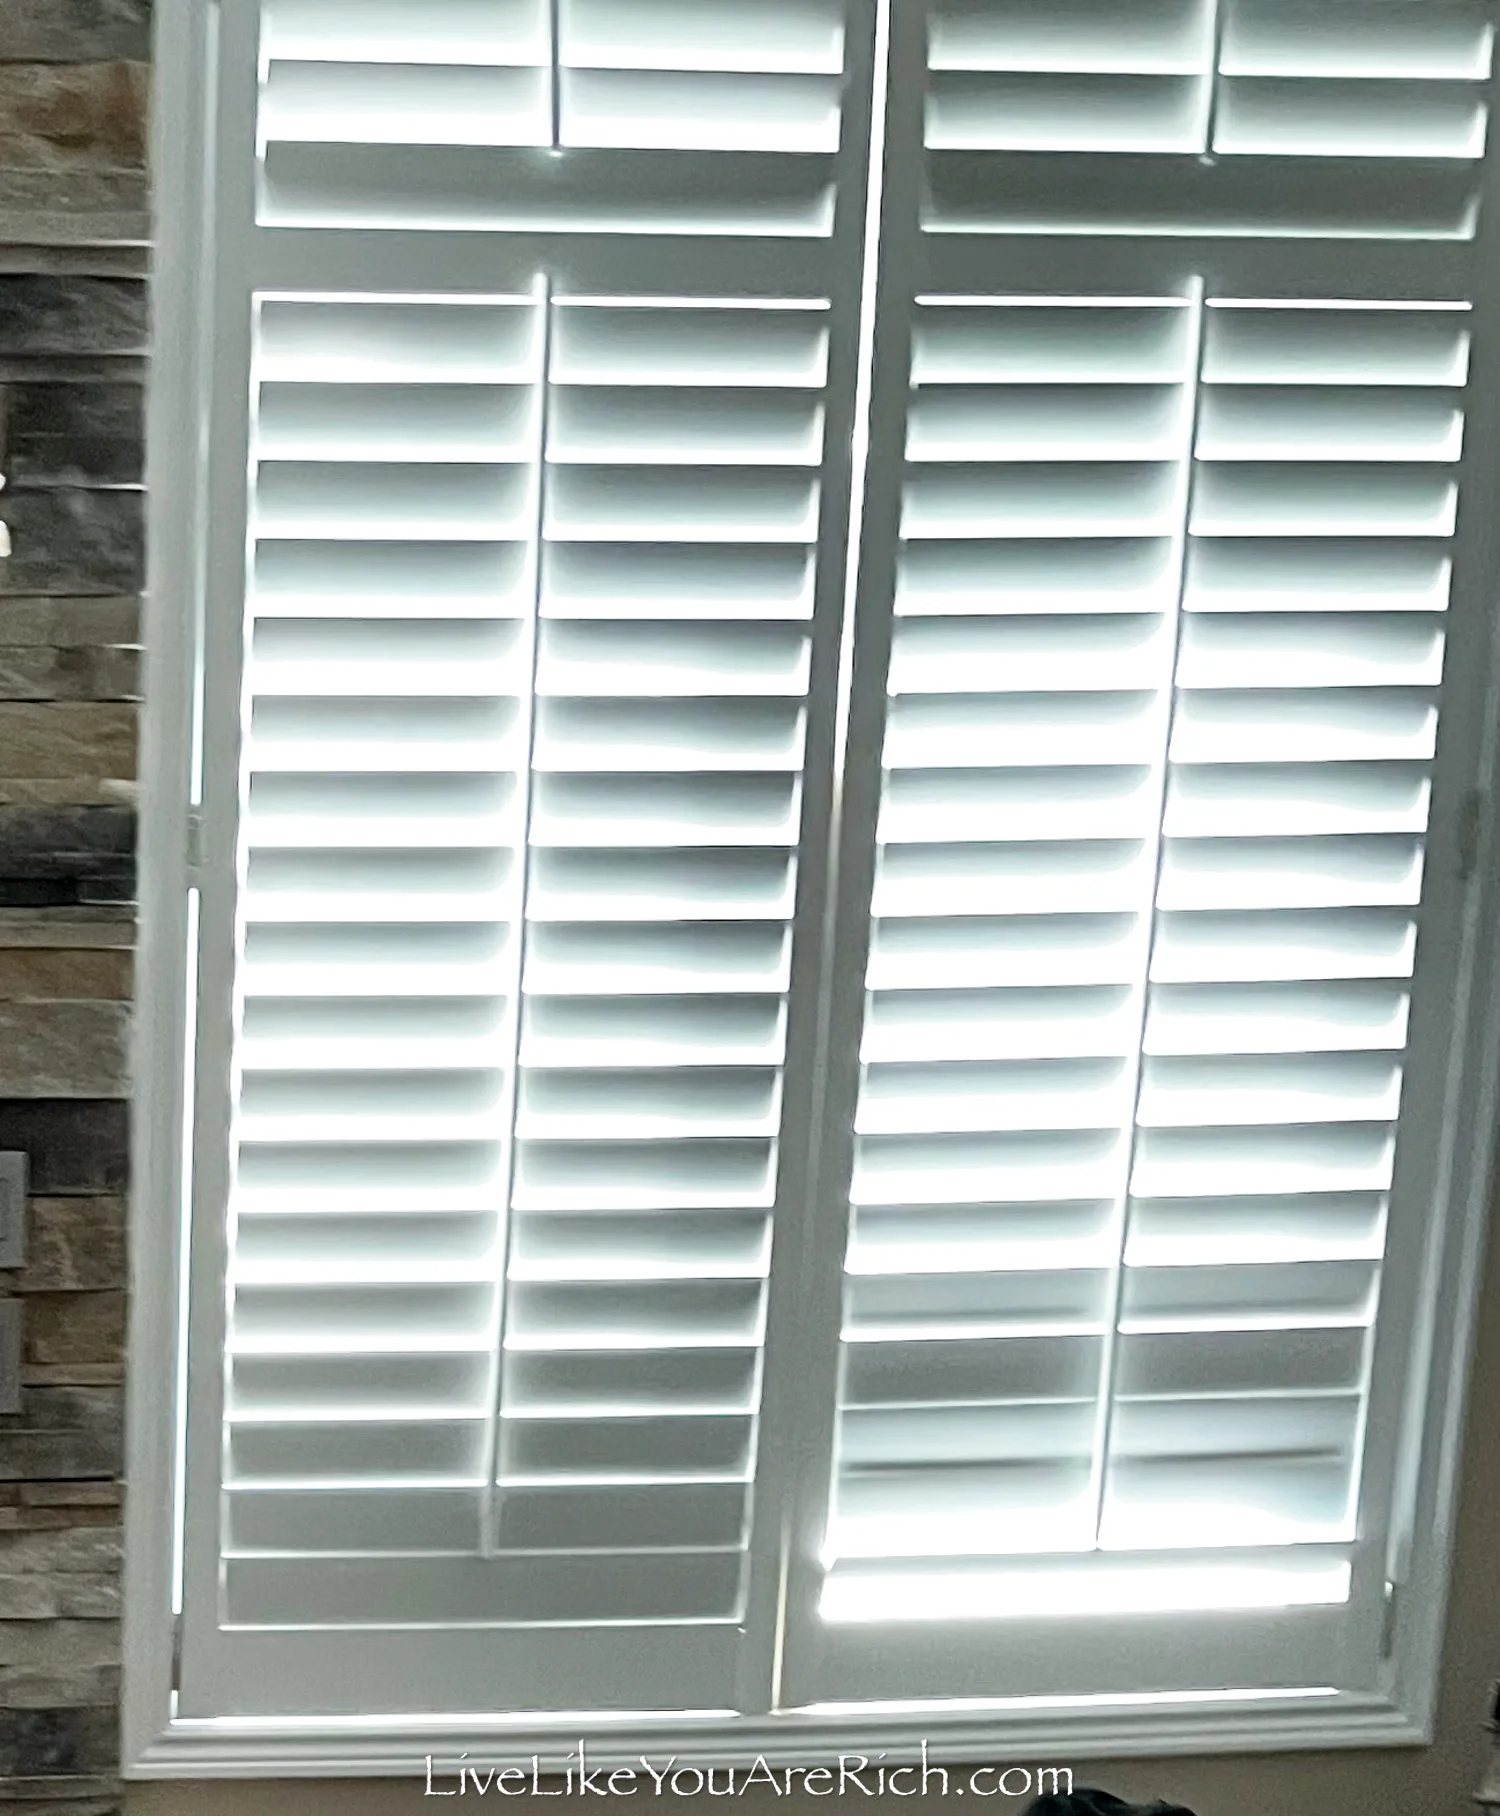 How to Fix Wooden Shutters When the Tilt Rods Come Loose